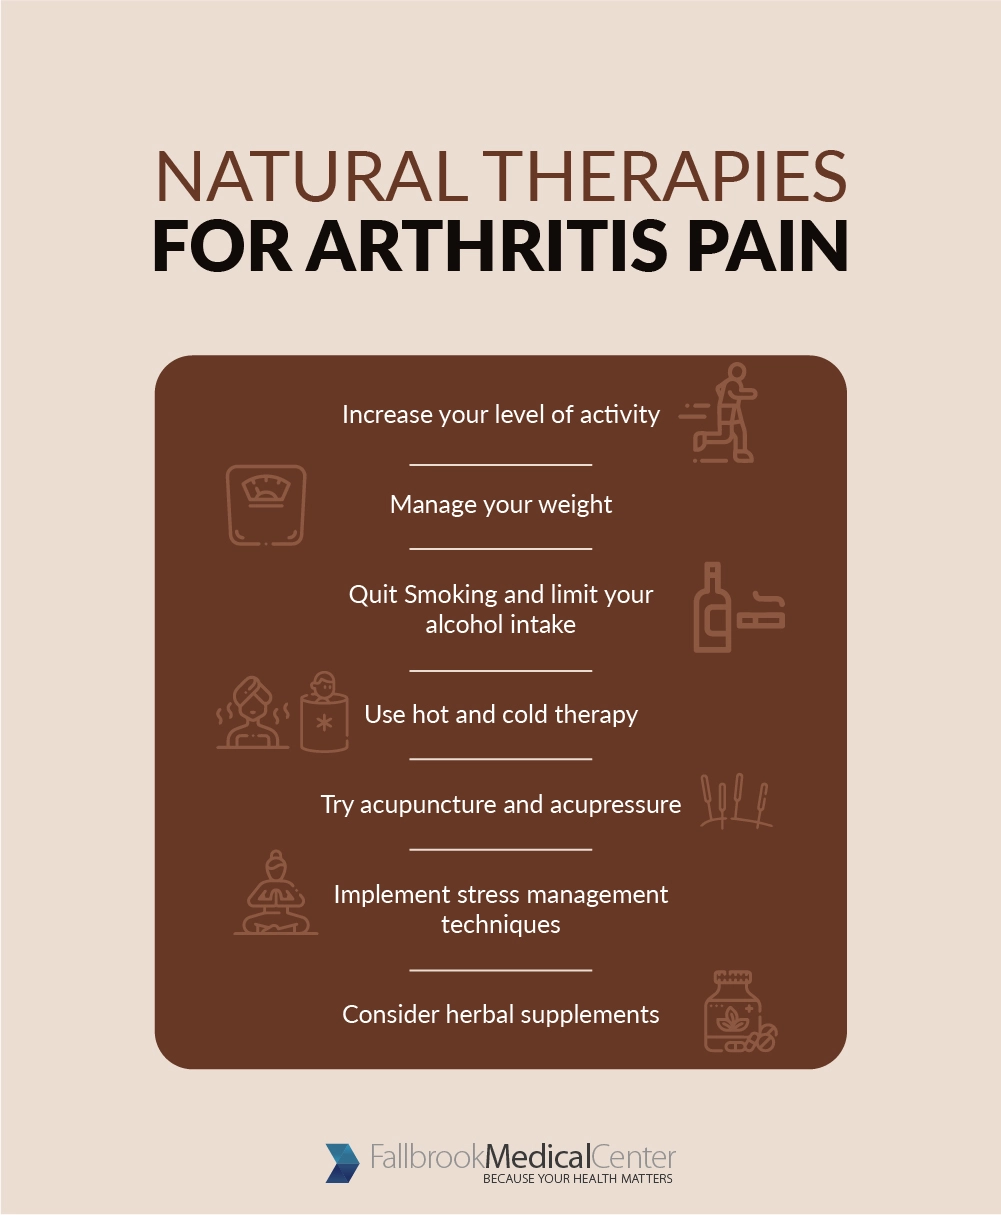 Natural Therapies for Arthritis Pain